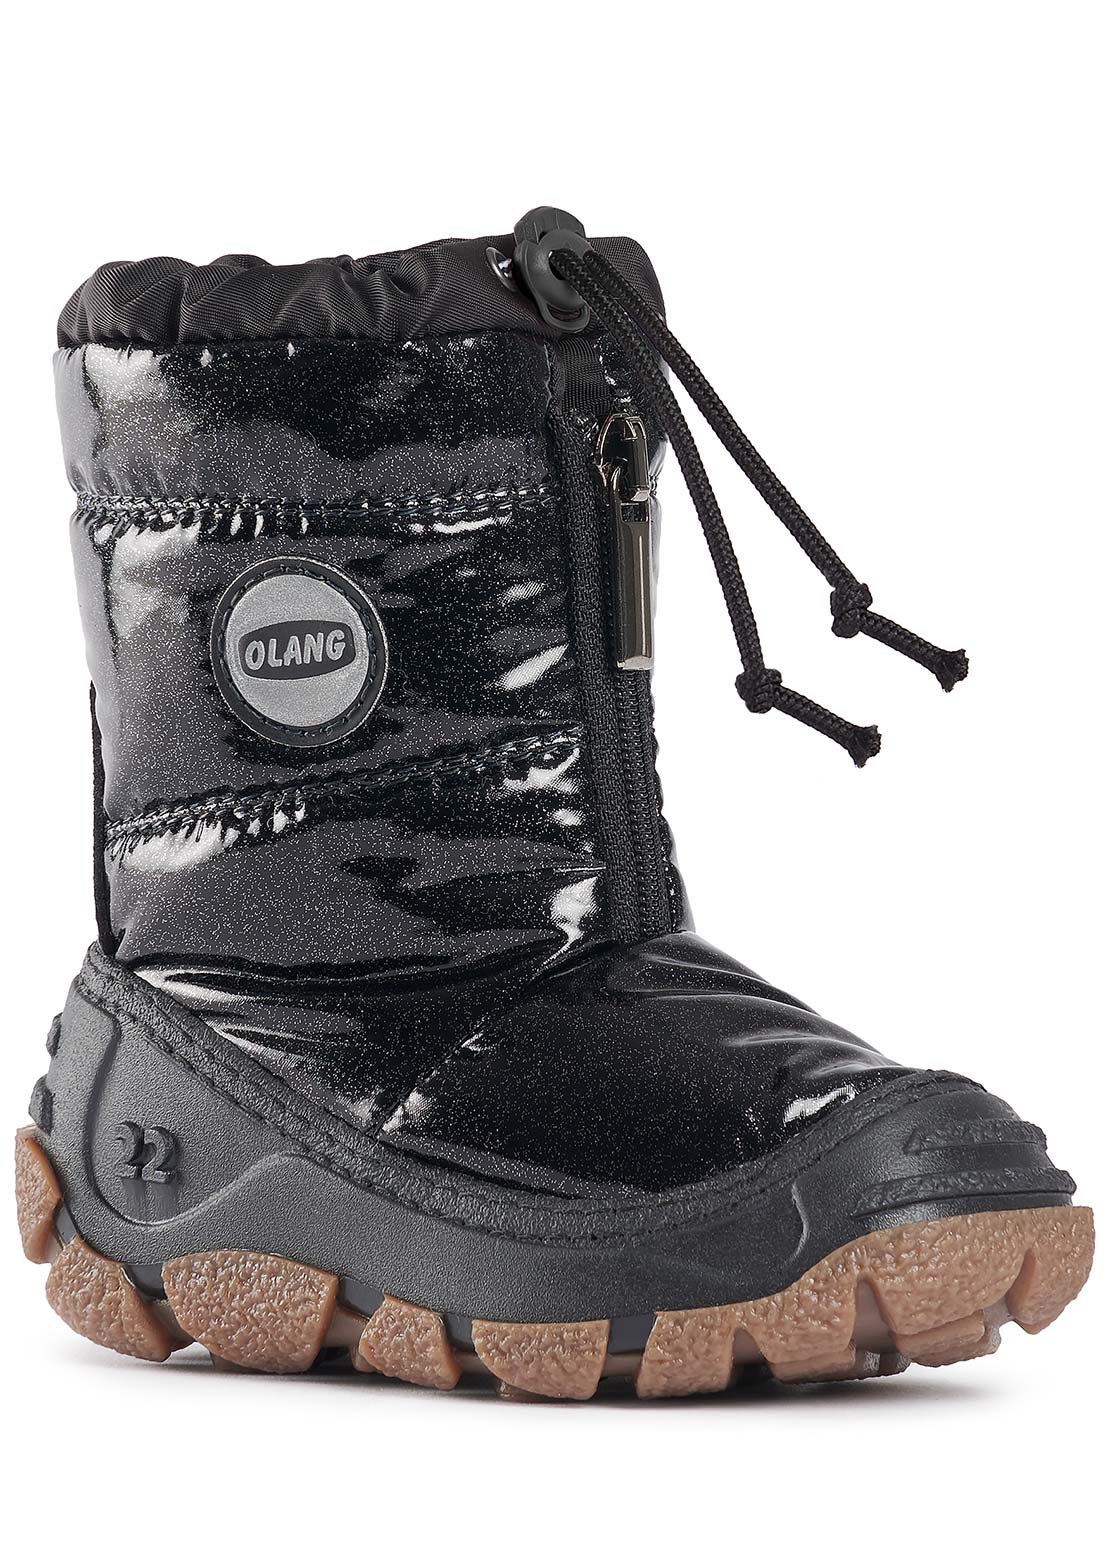 Olang Toddler Eolo Boots Ice Nero